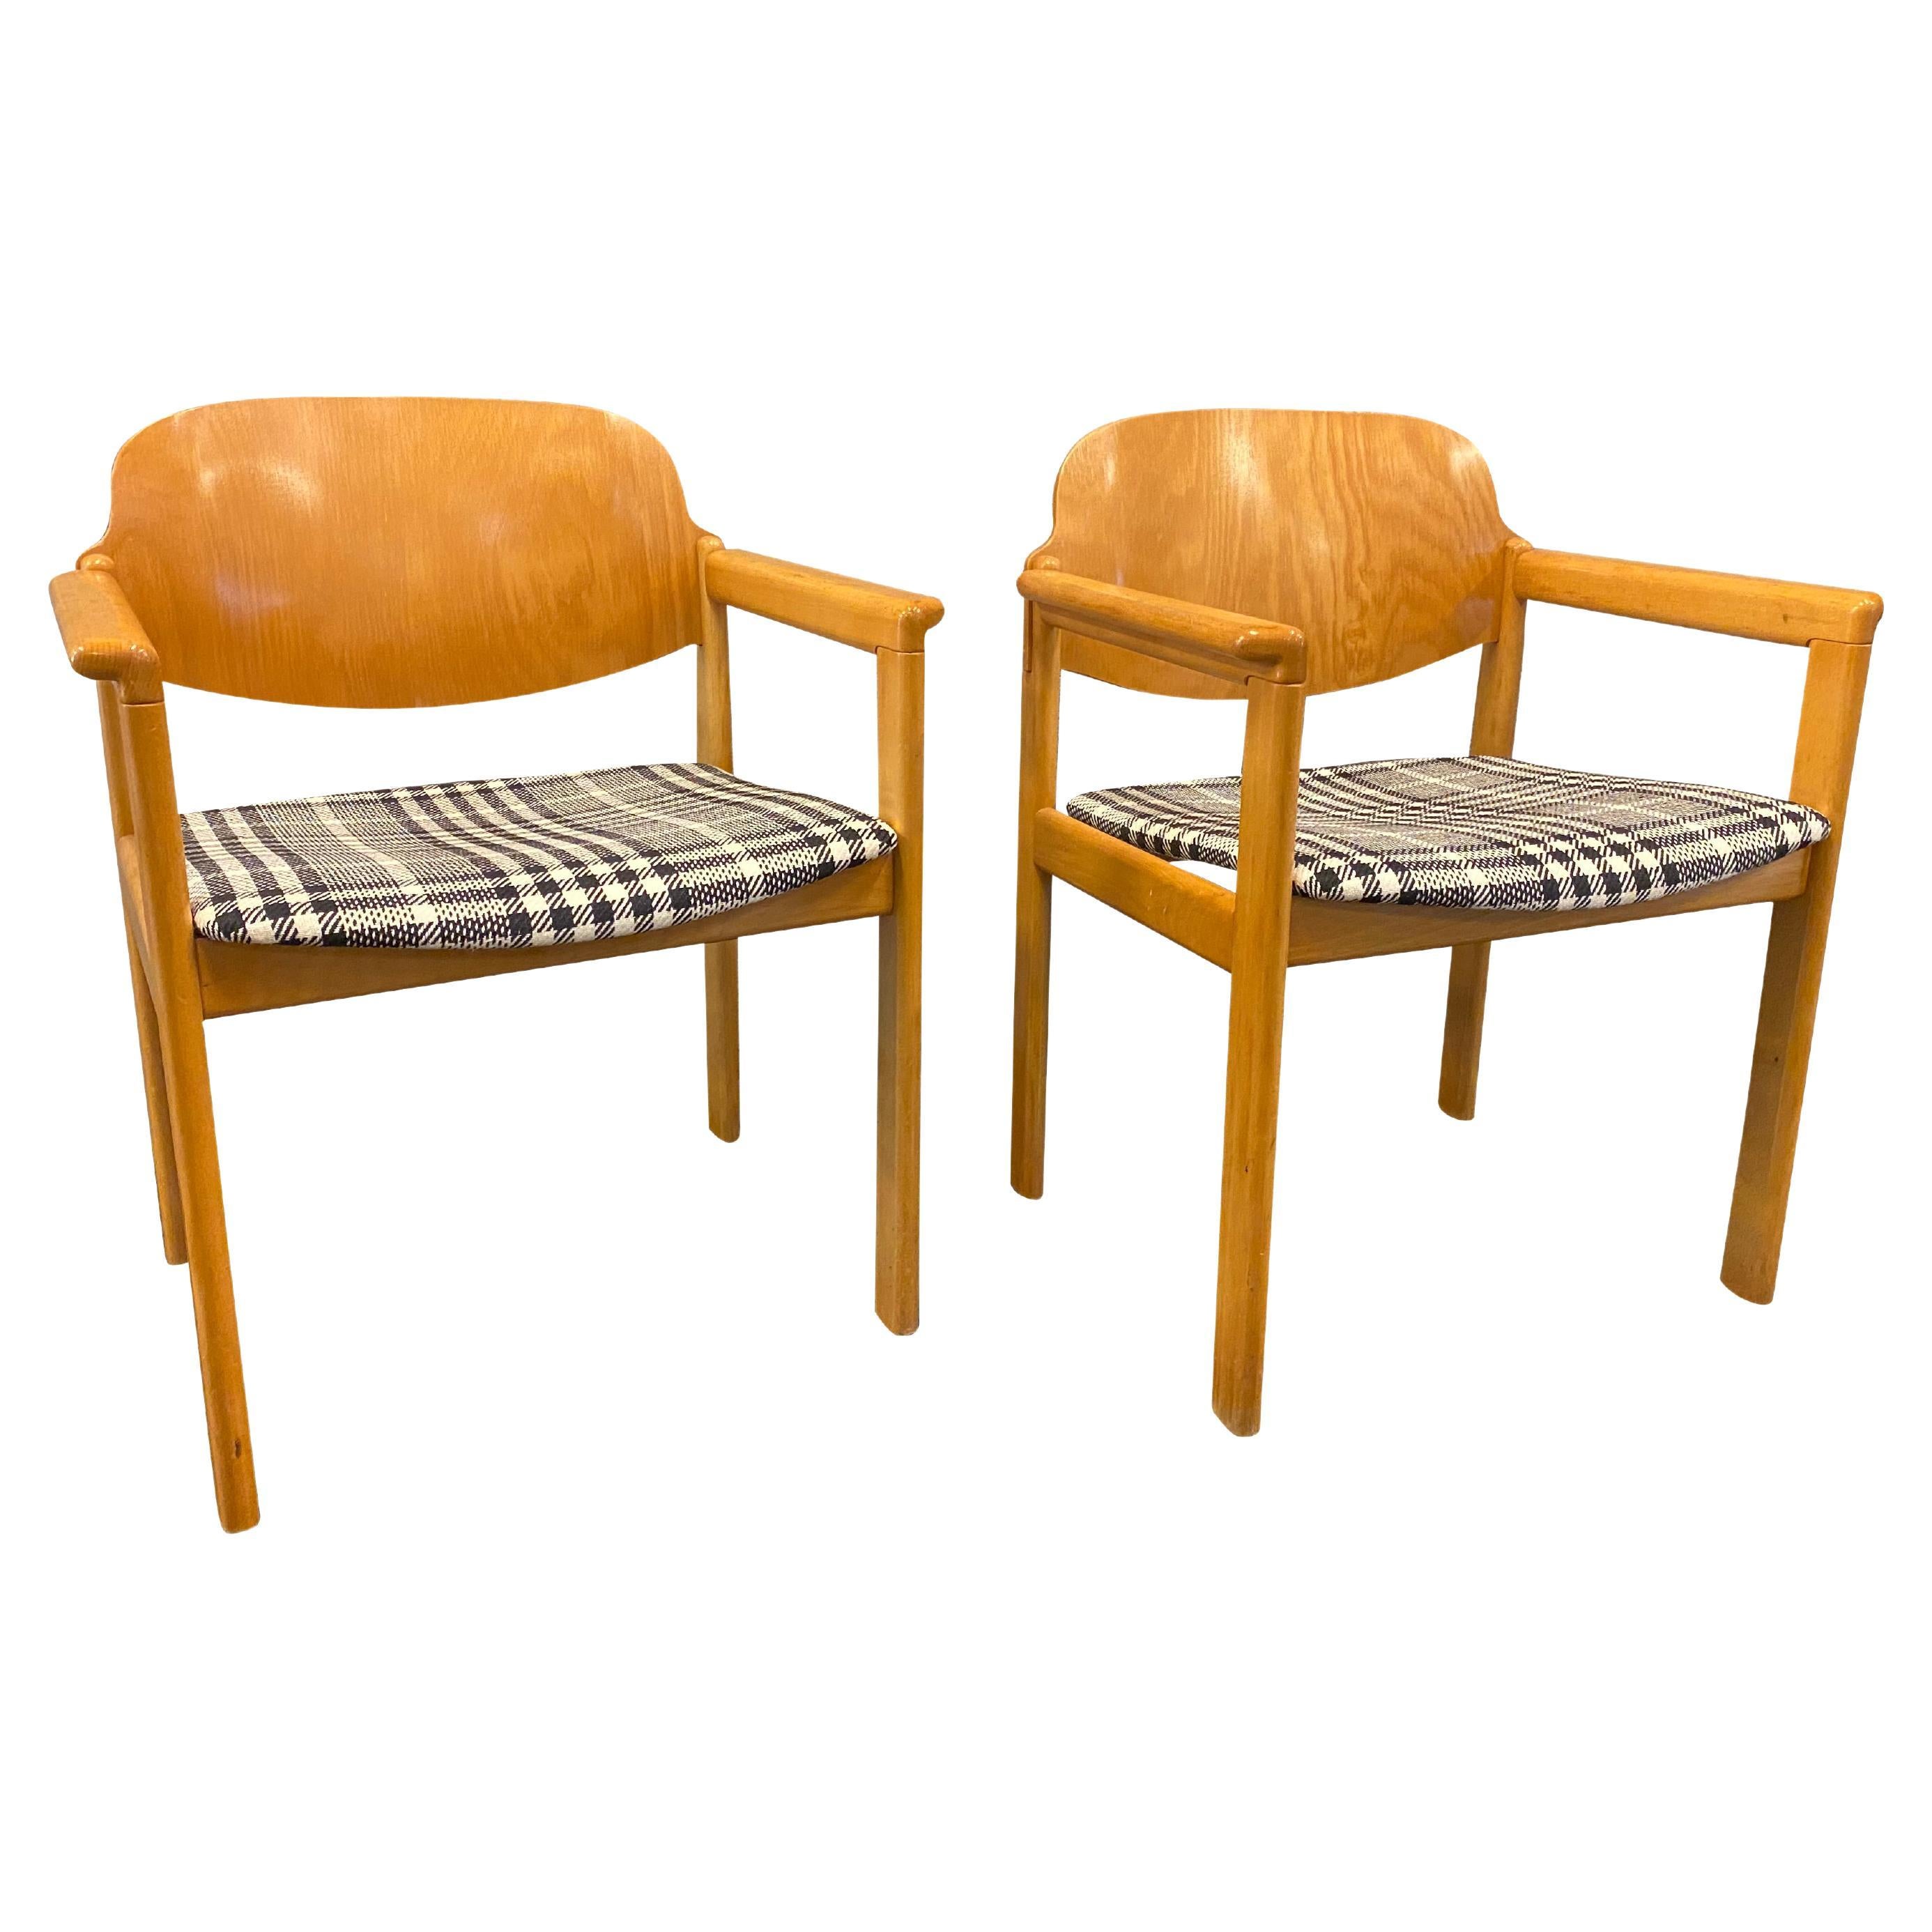 Pair of Scandinavian Mid-Century Armchairs in Plaid For Sale